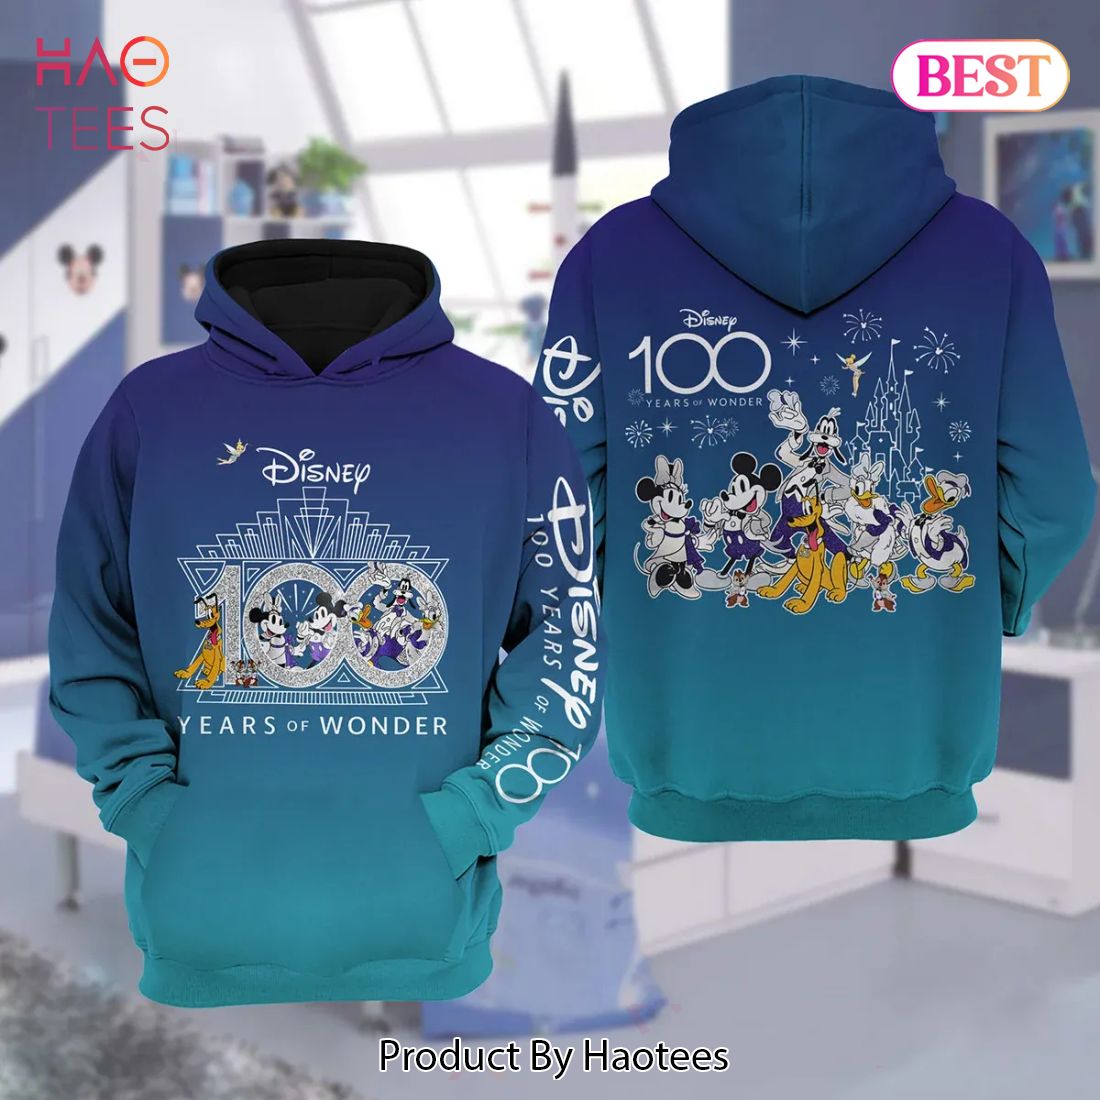 Disney 100 Years of Wonder Blue Unisex Hoodie Luxury Brand Clothing Special Gift Outfit For Men Women